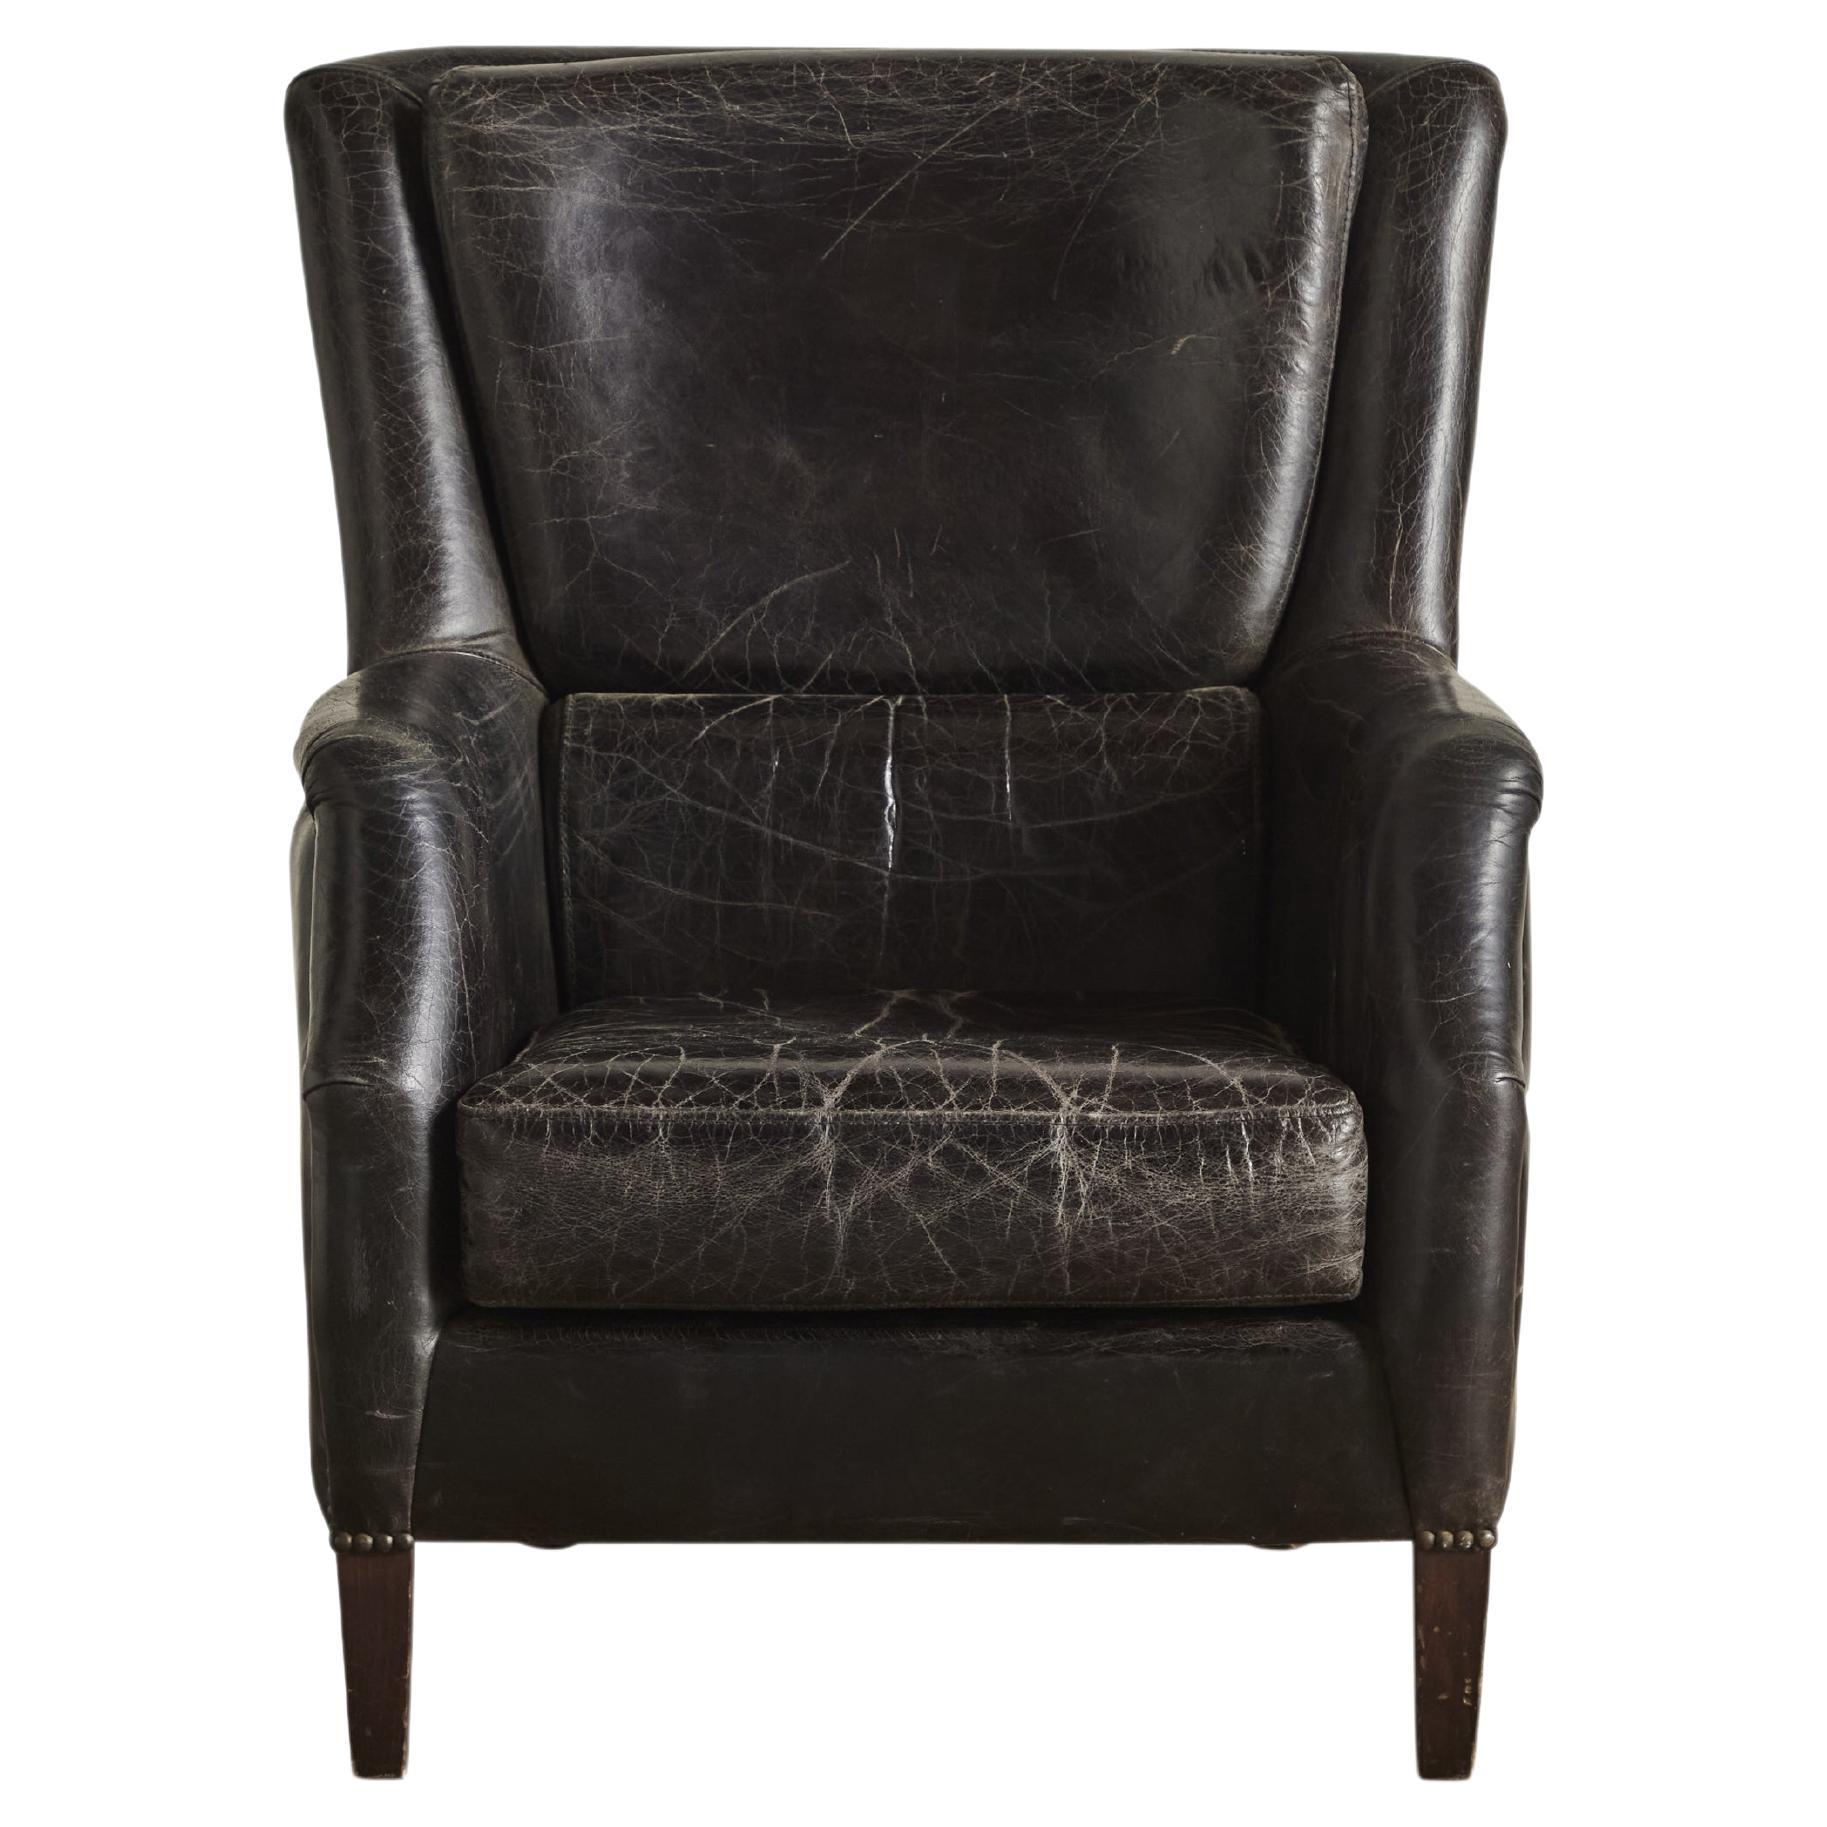 1960s Black Leather Chair For Sale